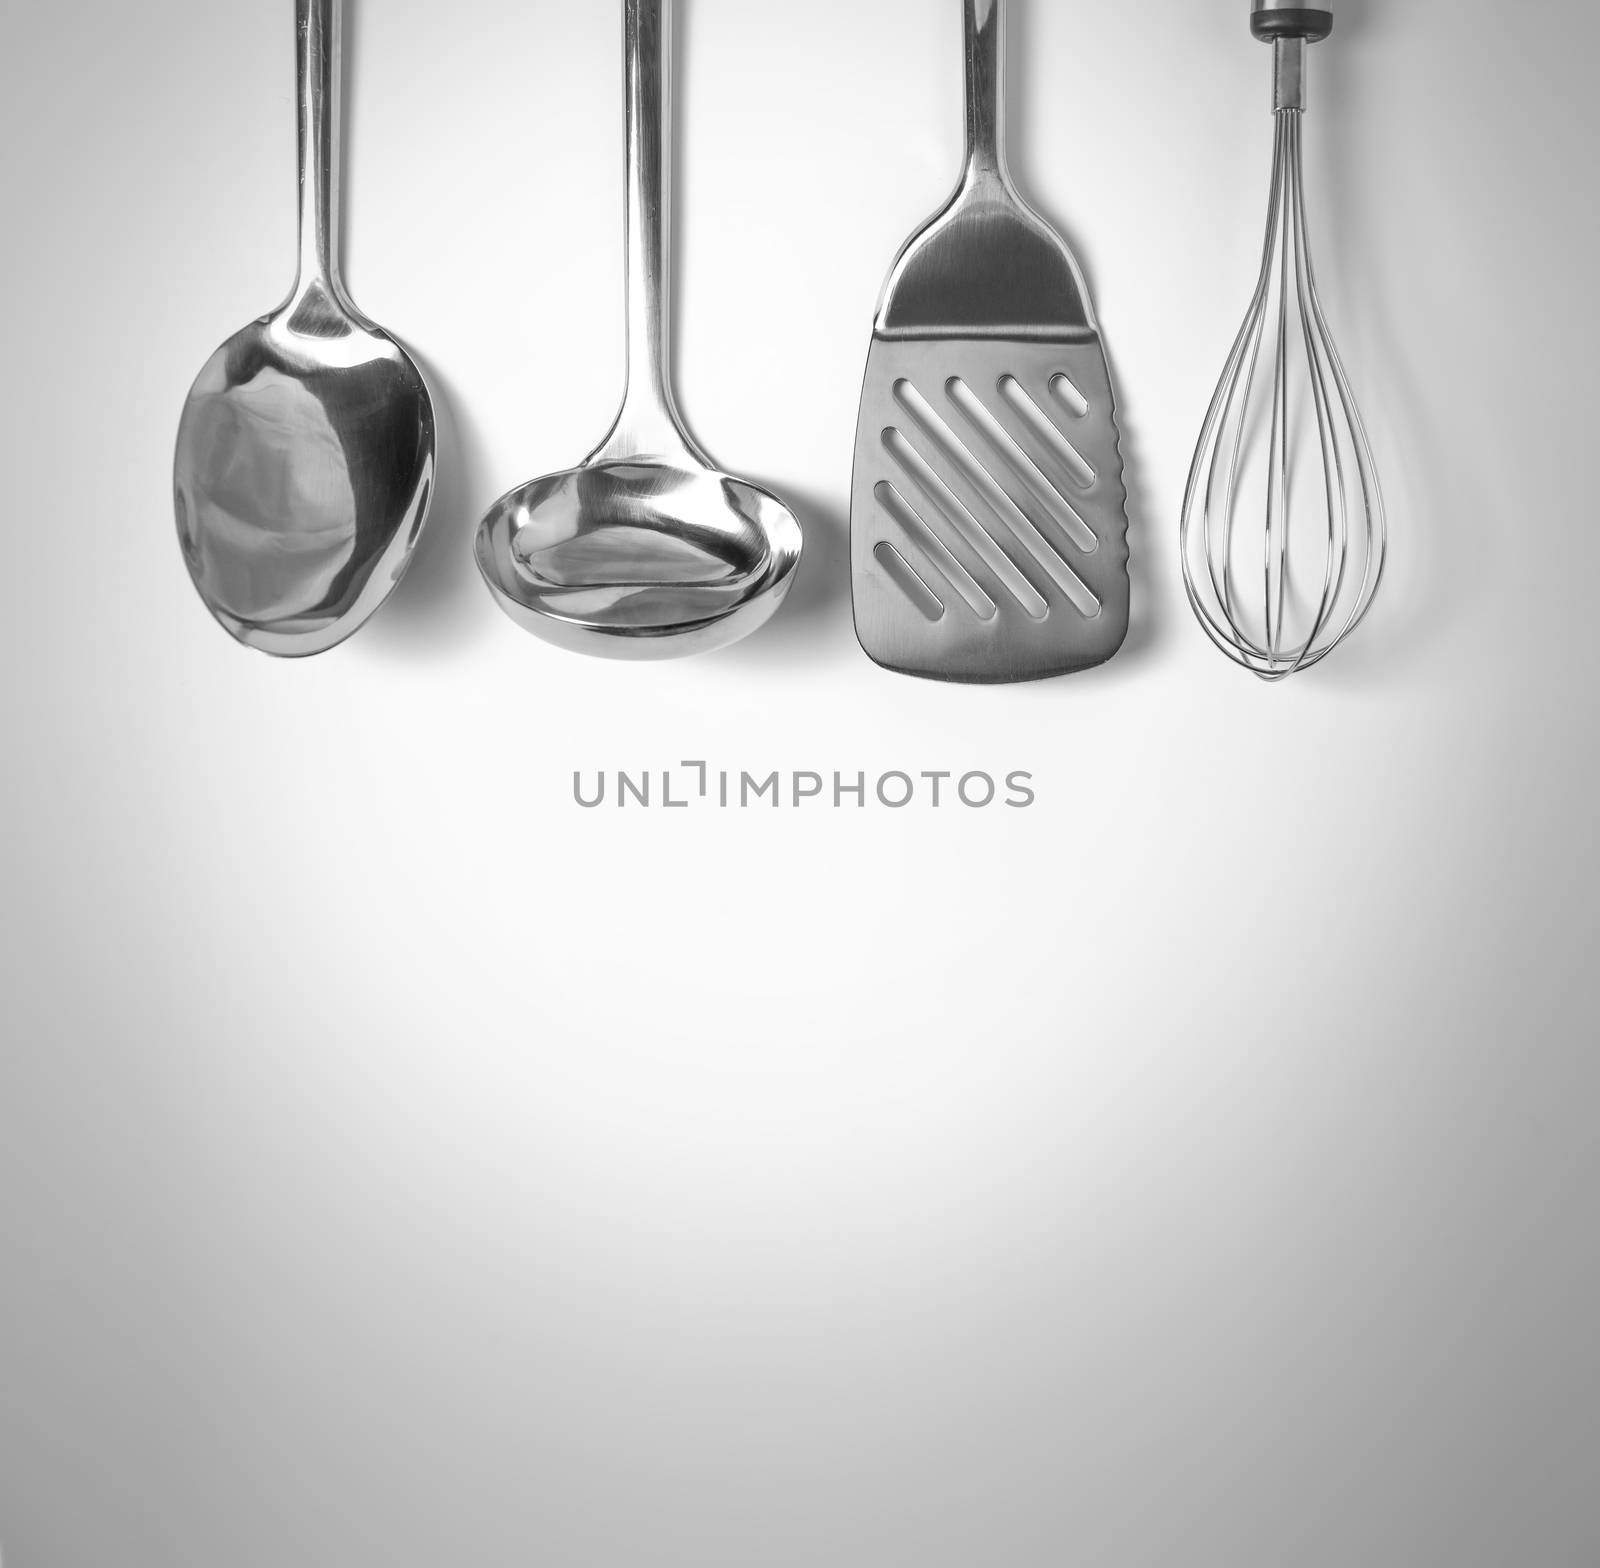 Set of kitchen tools hanged up in the wall